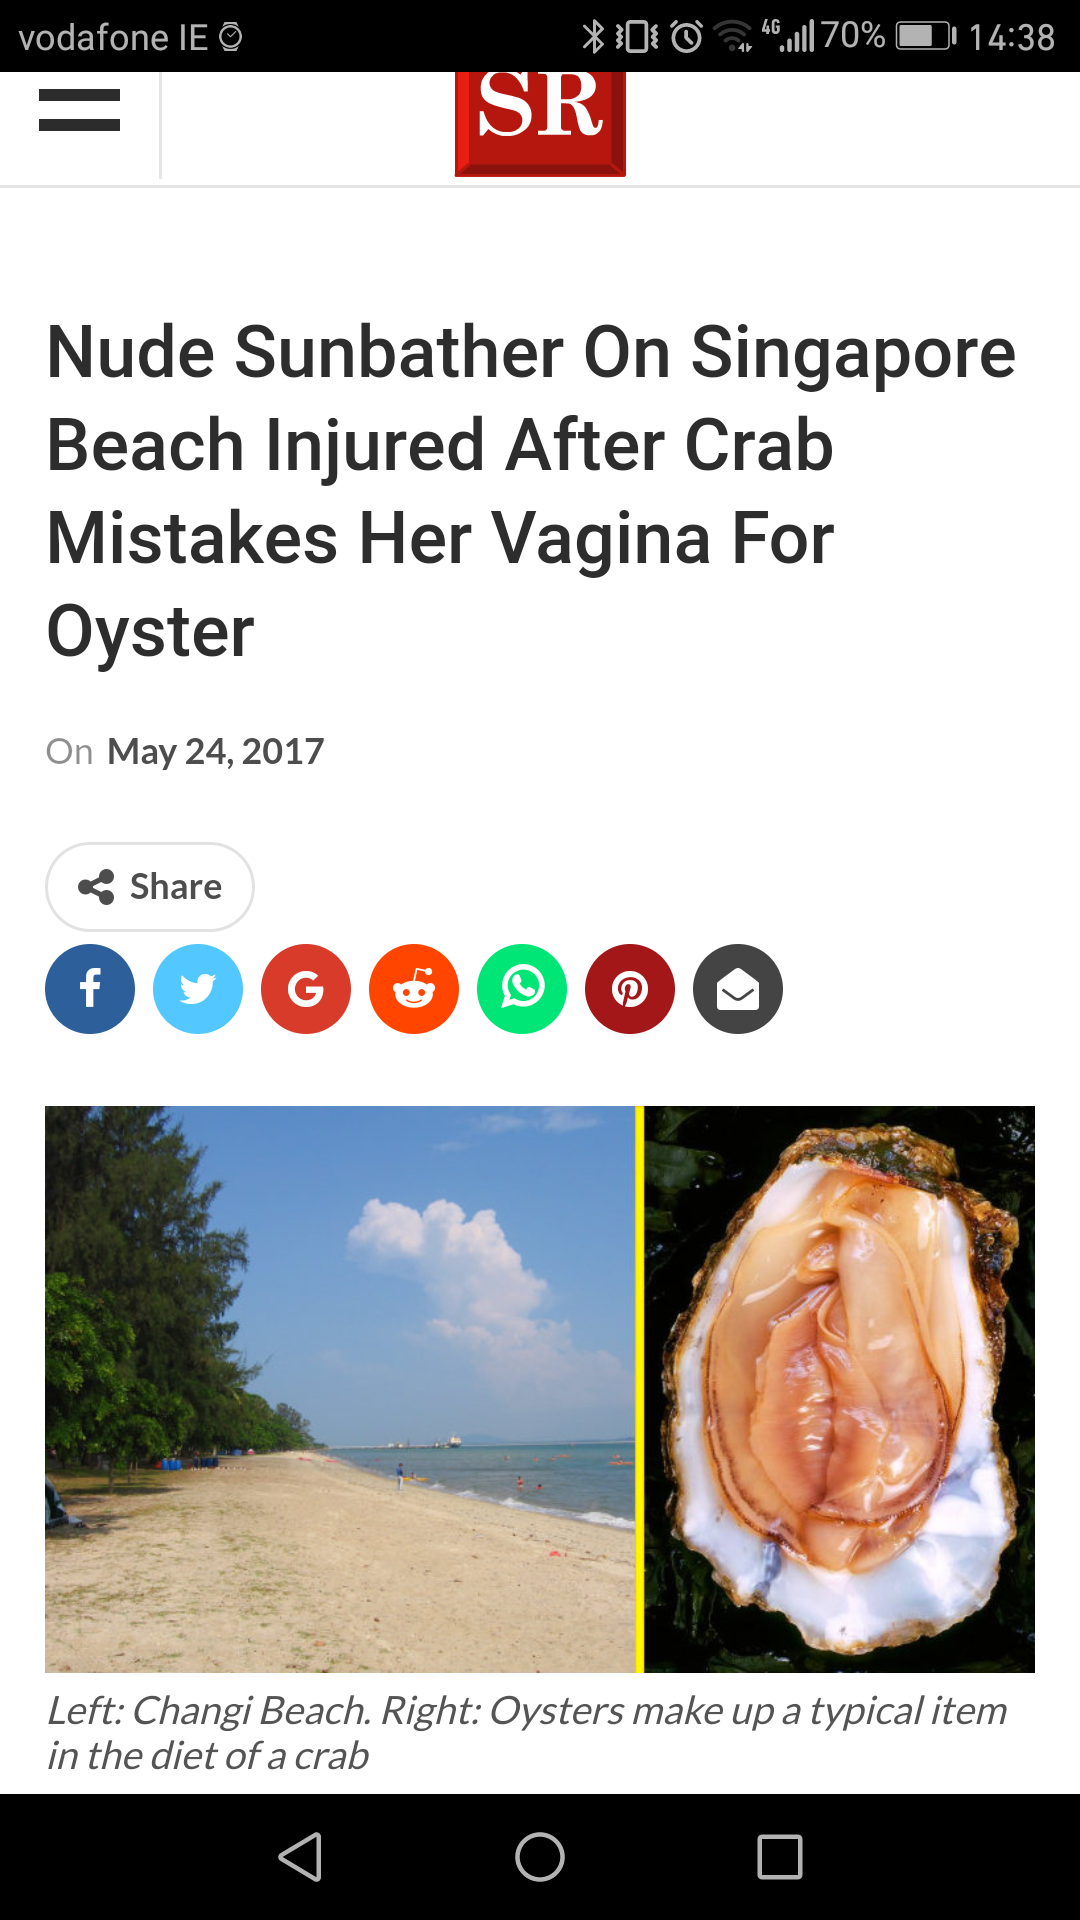 cool crab mistakes vagina for oyster - vodafone Ie 0 "470% 1438 010 Sr Nude Sunbather On Singapore Beach Injured After Crab Mistakes Her Vagina For Oyster On Ooooooo Left Changi Beach Right Oysters make up a typical item in the diet of a crab